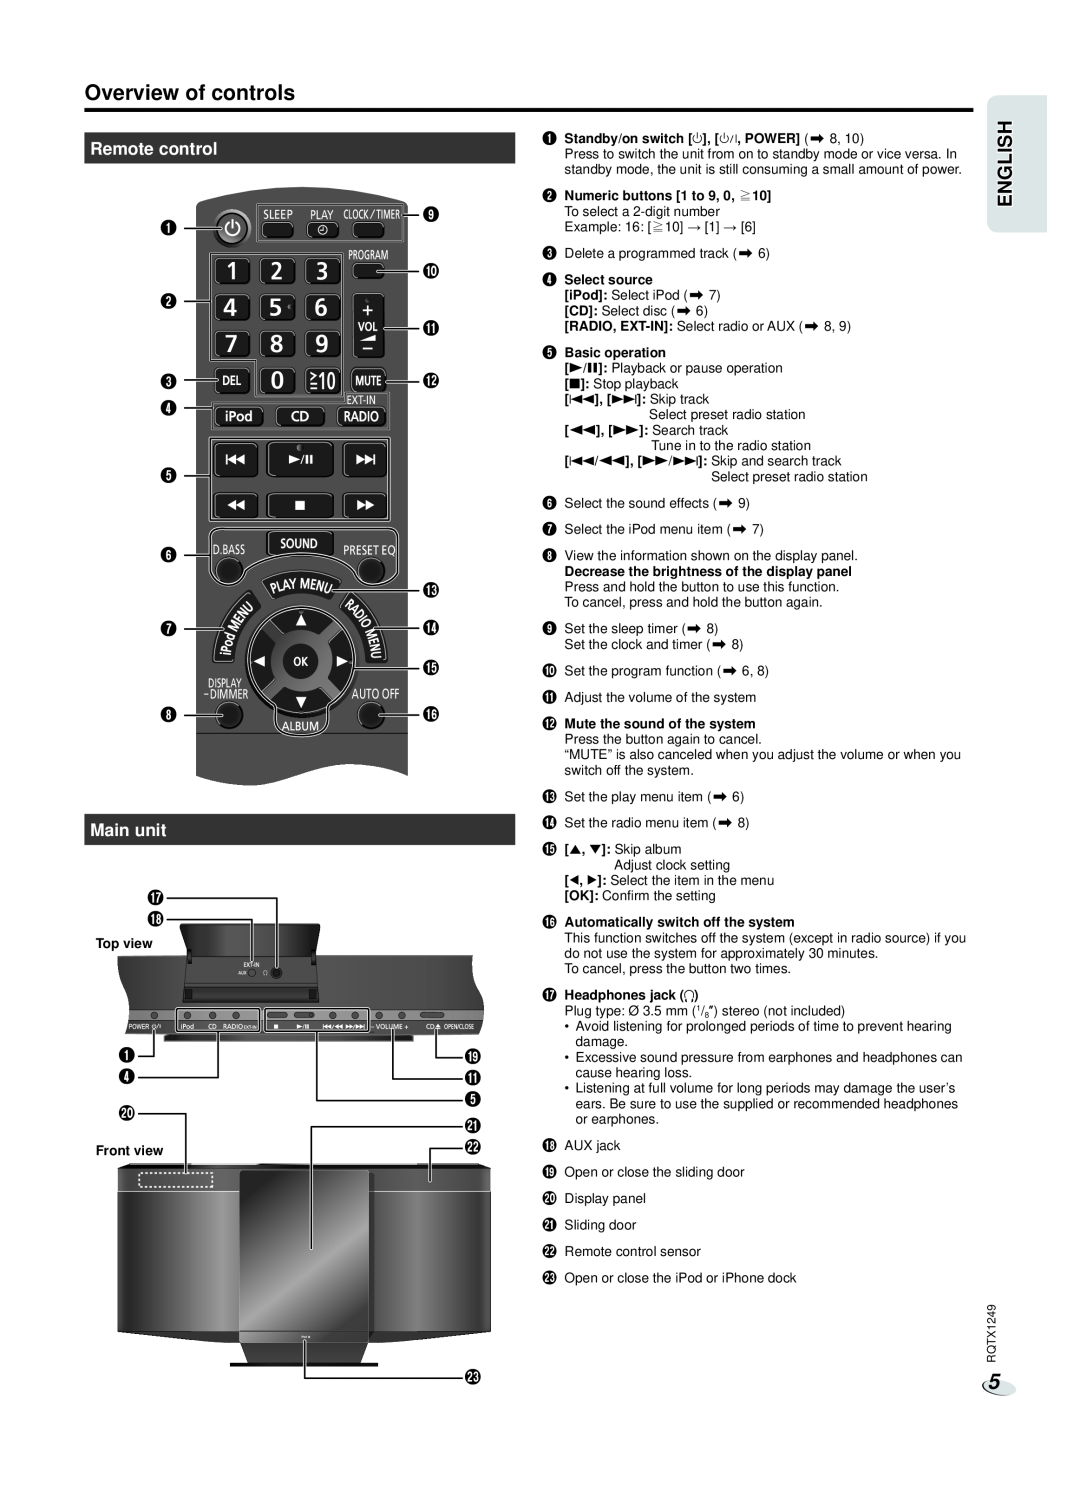 Panasonic SC-HC25 owner manual Overview of controls, Remote control, Main unit, English 